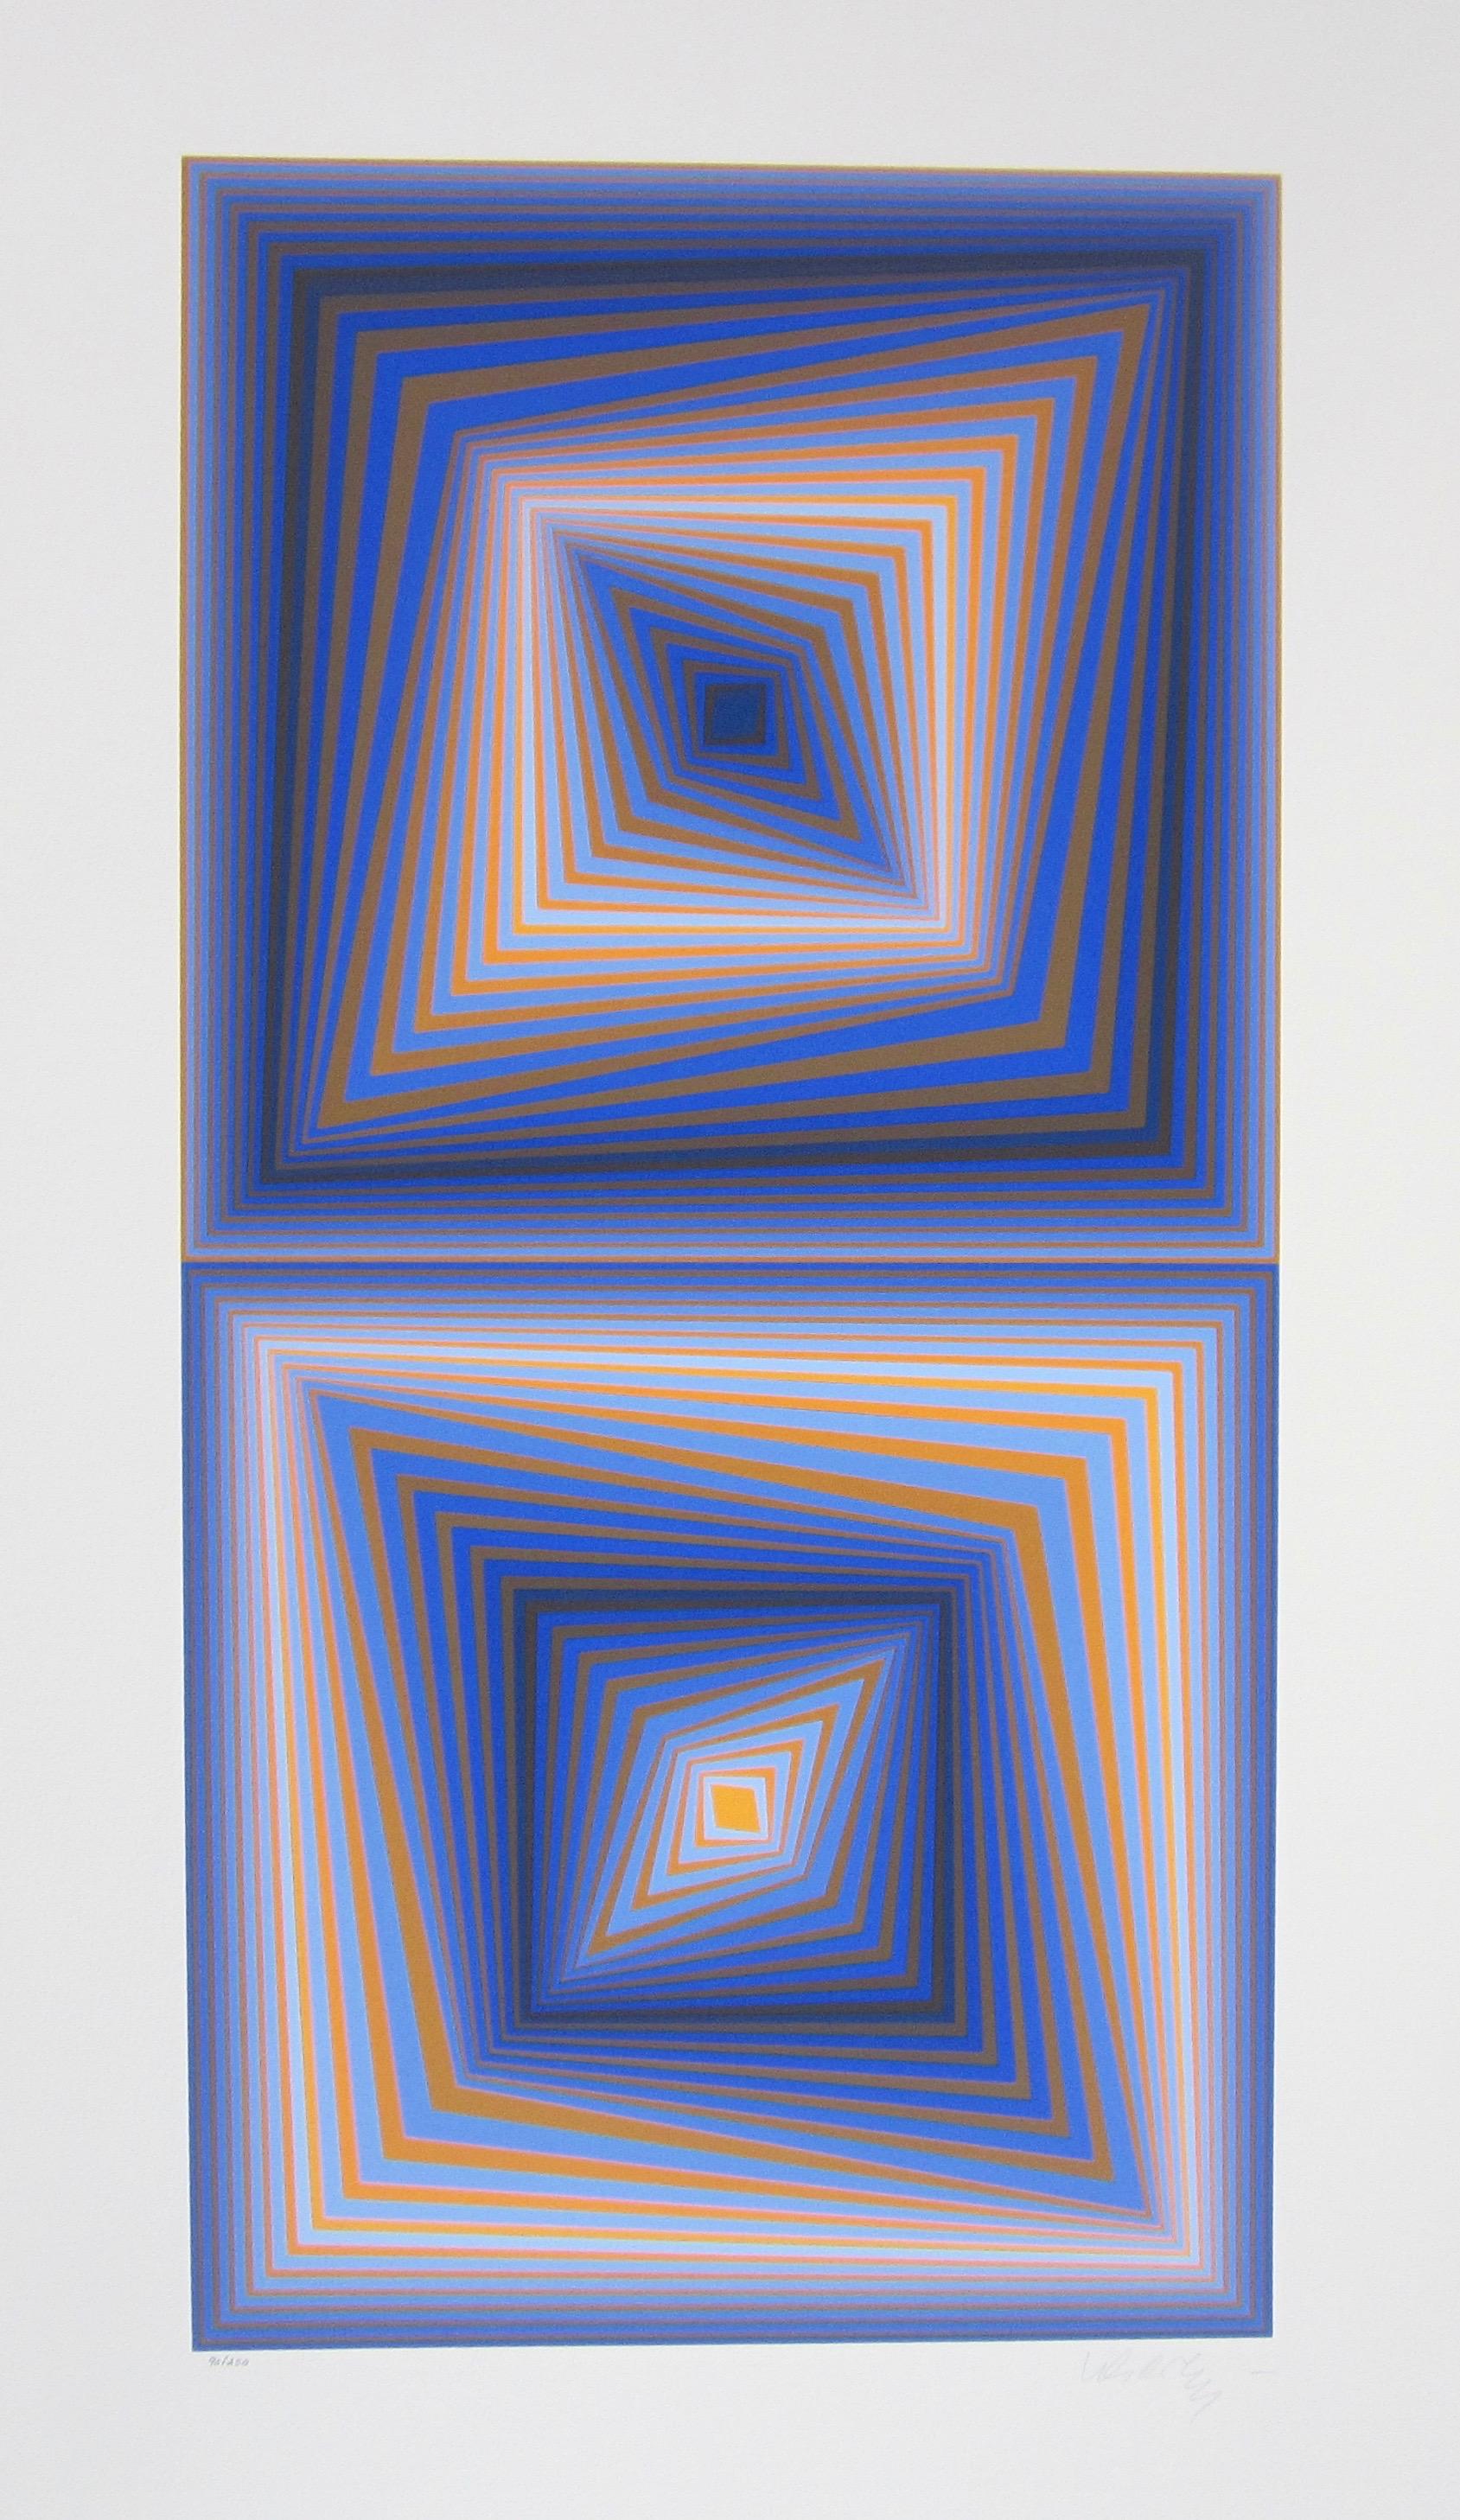 Artist: Victor Vasarely (1908-1997)
Title: BI-RHOMBS
Year: 1977
Medium: Silkscreen on Arches paper
Edition: 250, plus proofs
Size: 43.5 x 26 inches
Condition: Excellent
Inscription: Signed and numbered by the artist.
Notes:  Published by Atelier